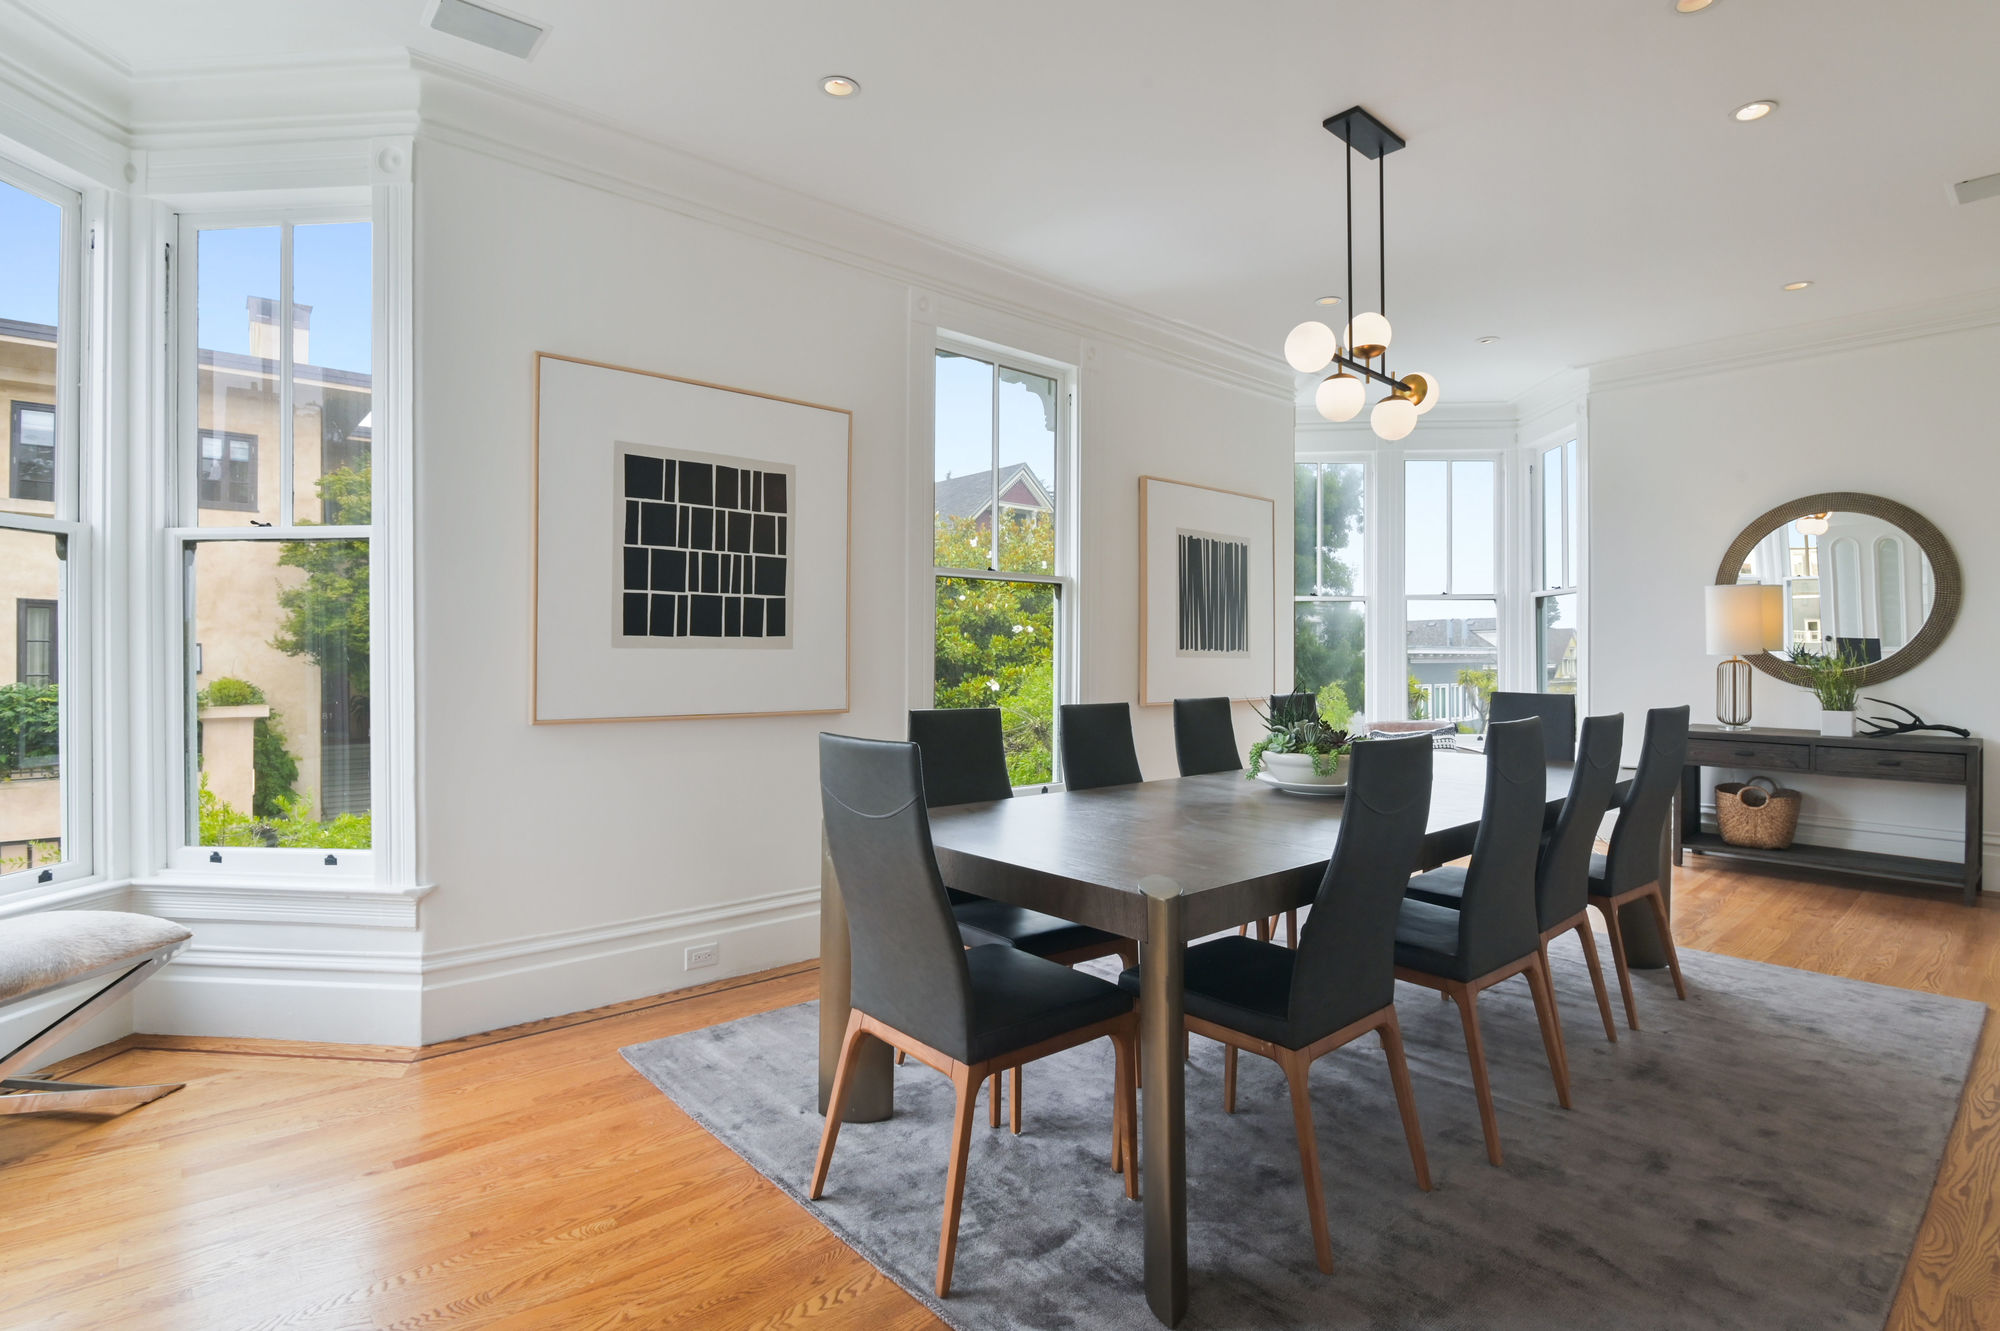 Property Photo: View of a formal dining room with wood floors and plenty of natural light